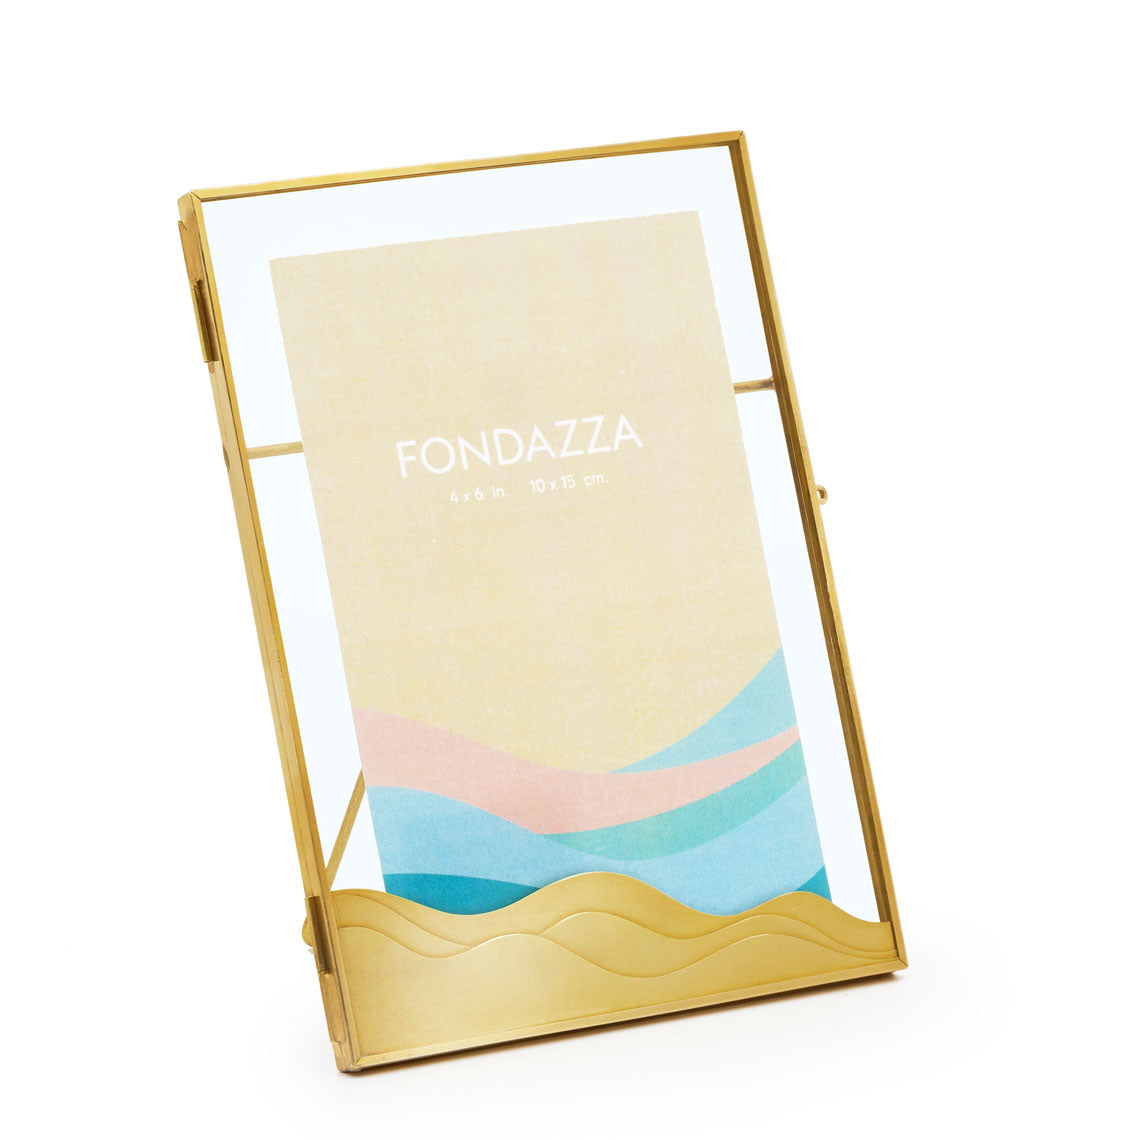 gold picture frames - unique and modern wave design - 4x6 photo-The most beautiful Home furnishing and home accents at FONDAZZA.